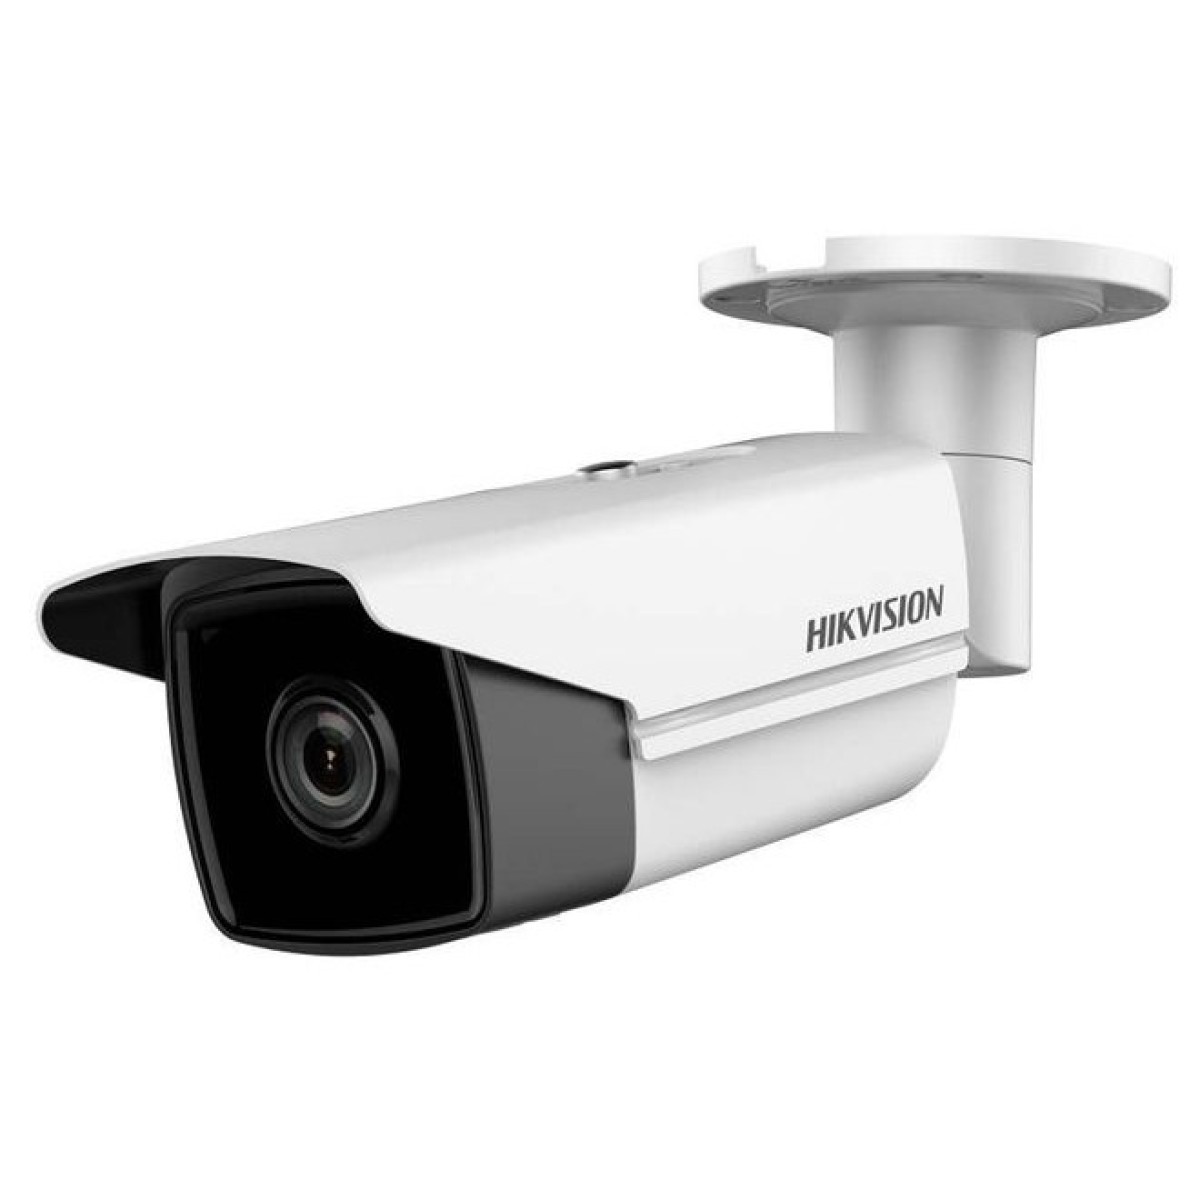 IP-камера Hikvision DS-2CD2T35FWD-I8 (4.0) 98_98.jpg